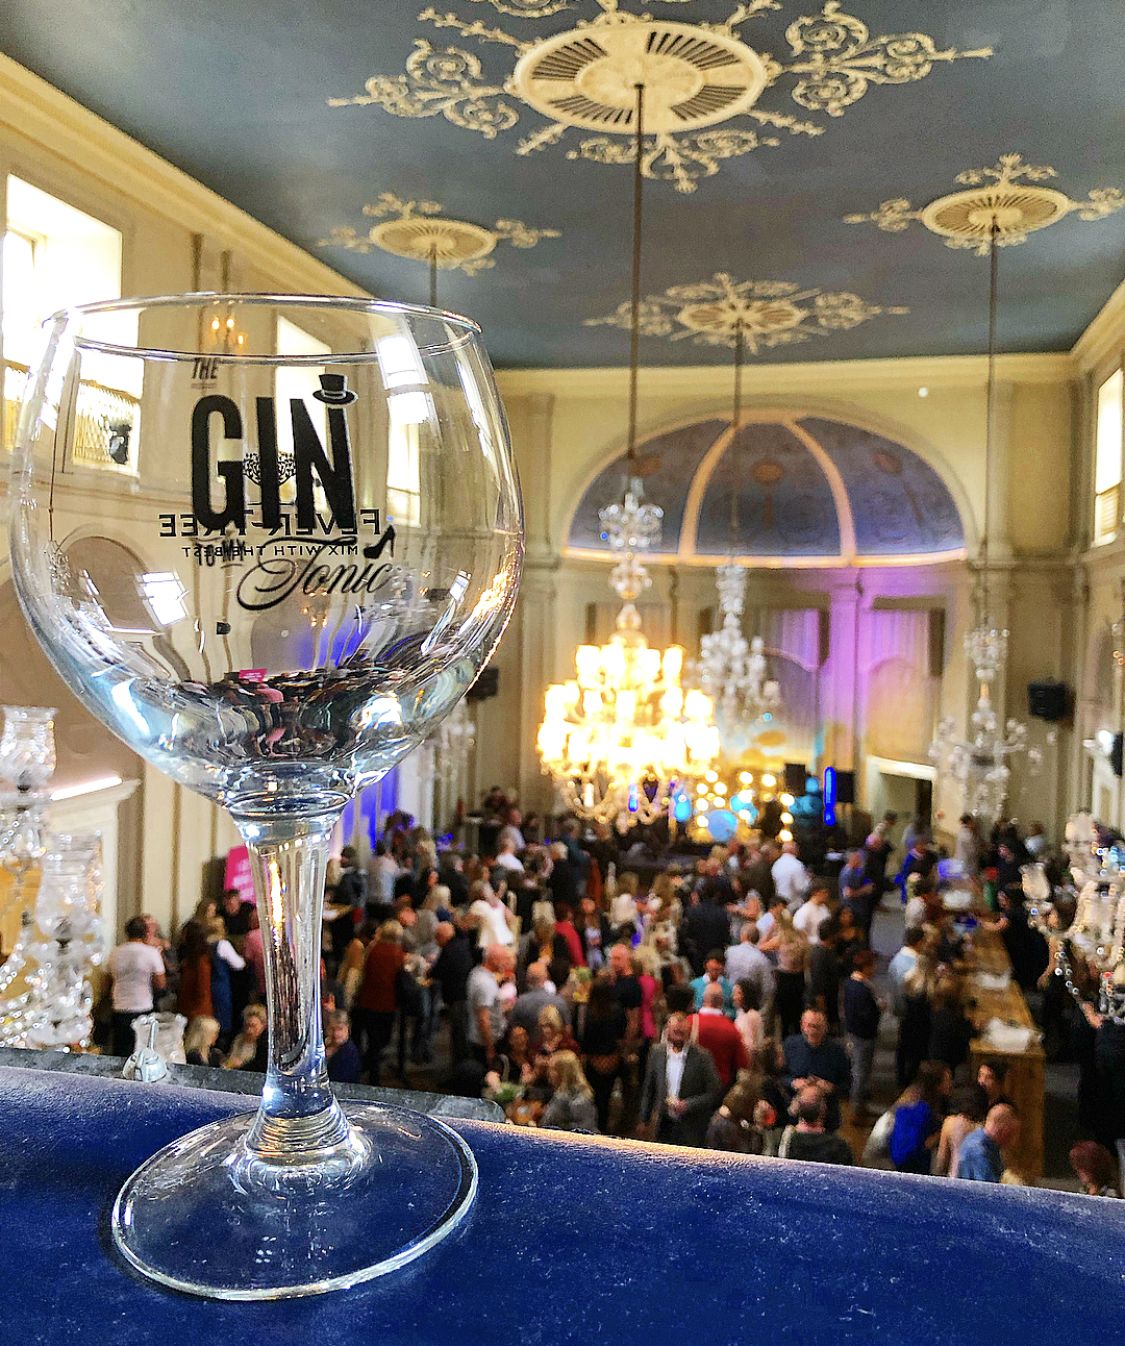 A Hand Holding a Gin Glass in front of an event